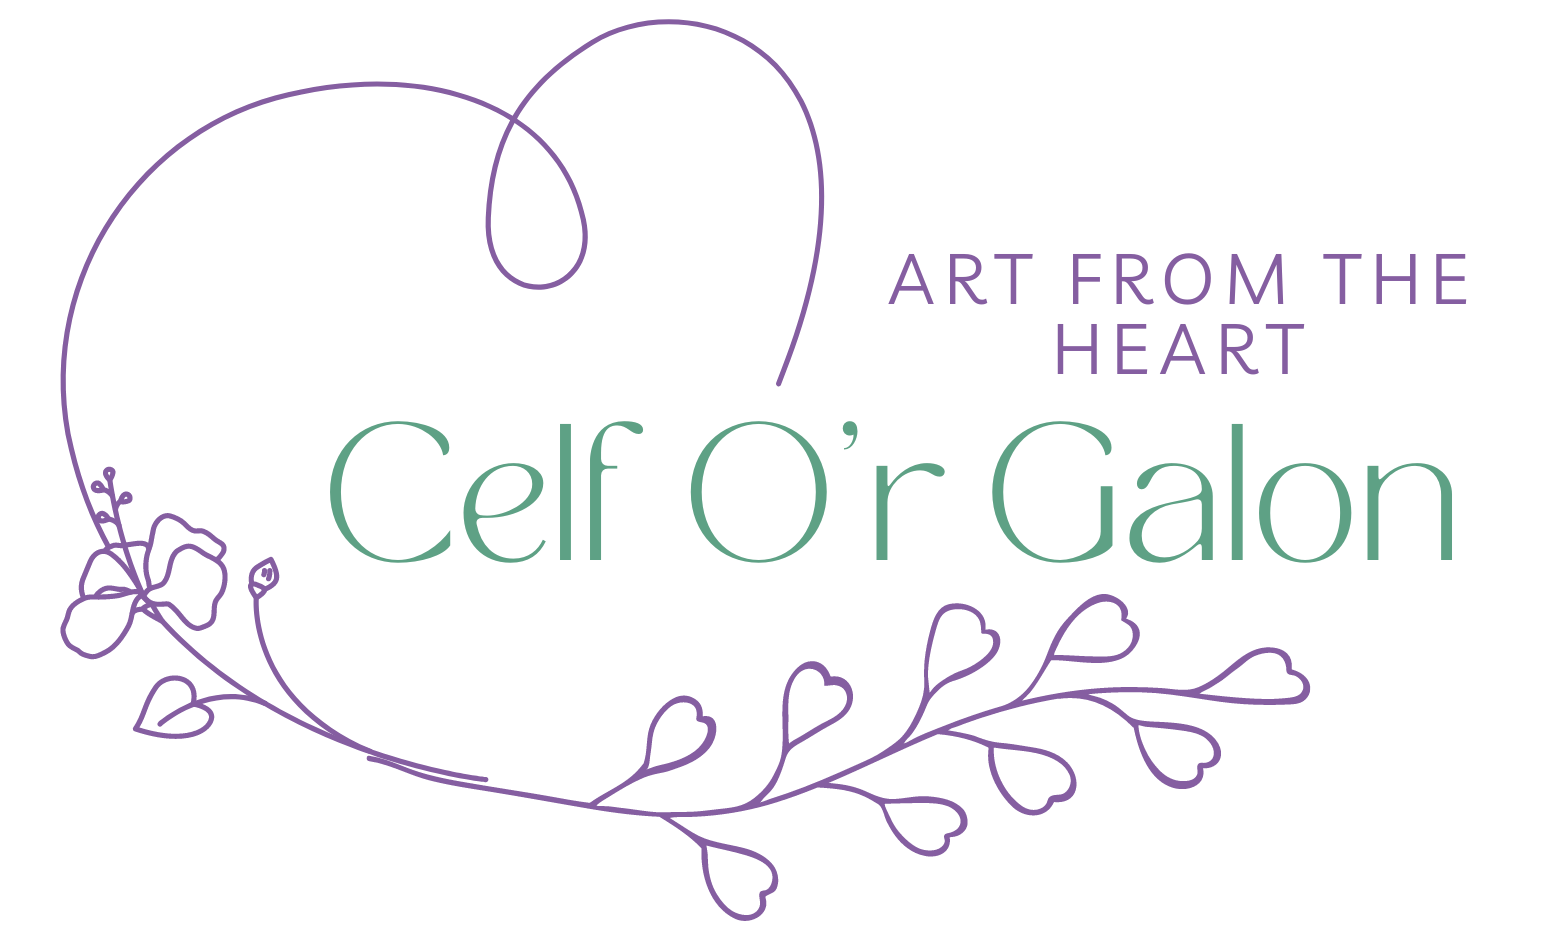 Celf O'r Galon – Art from the Heart